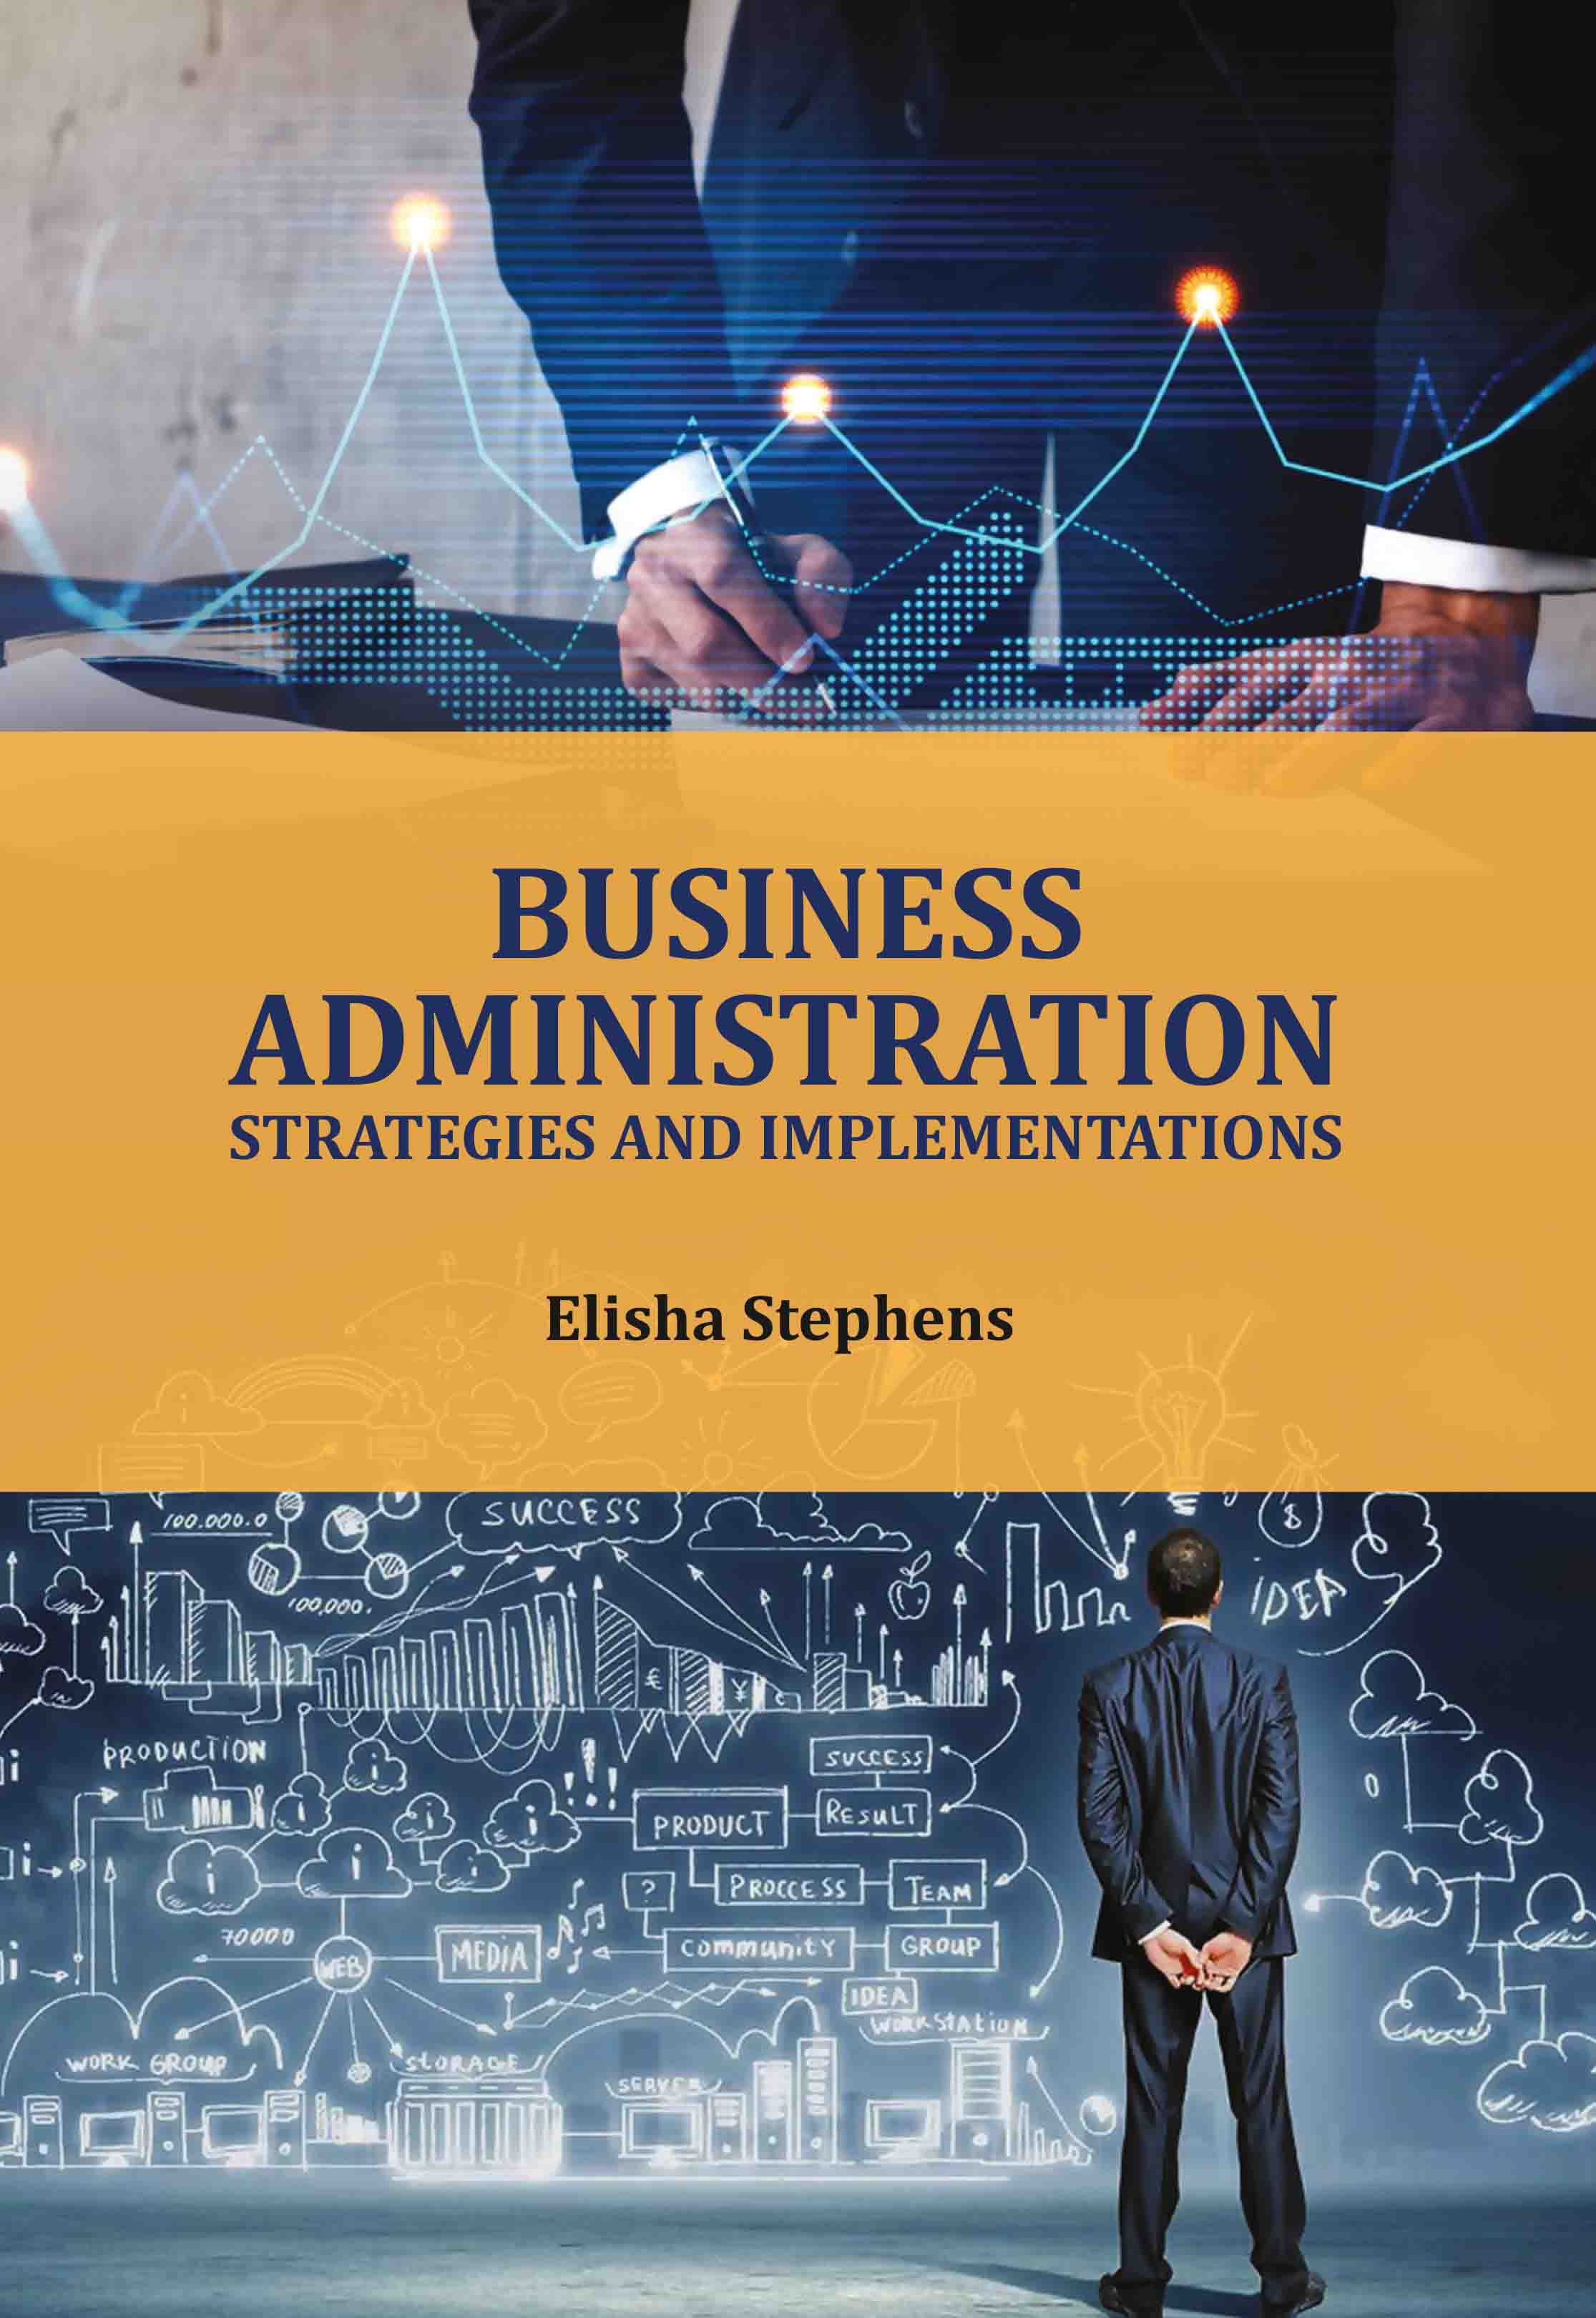 Business Administration: Strategies and Implementations